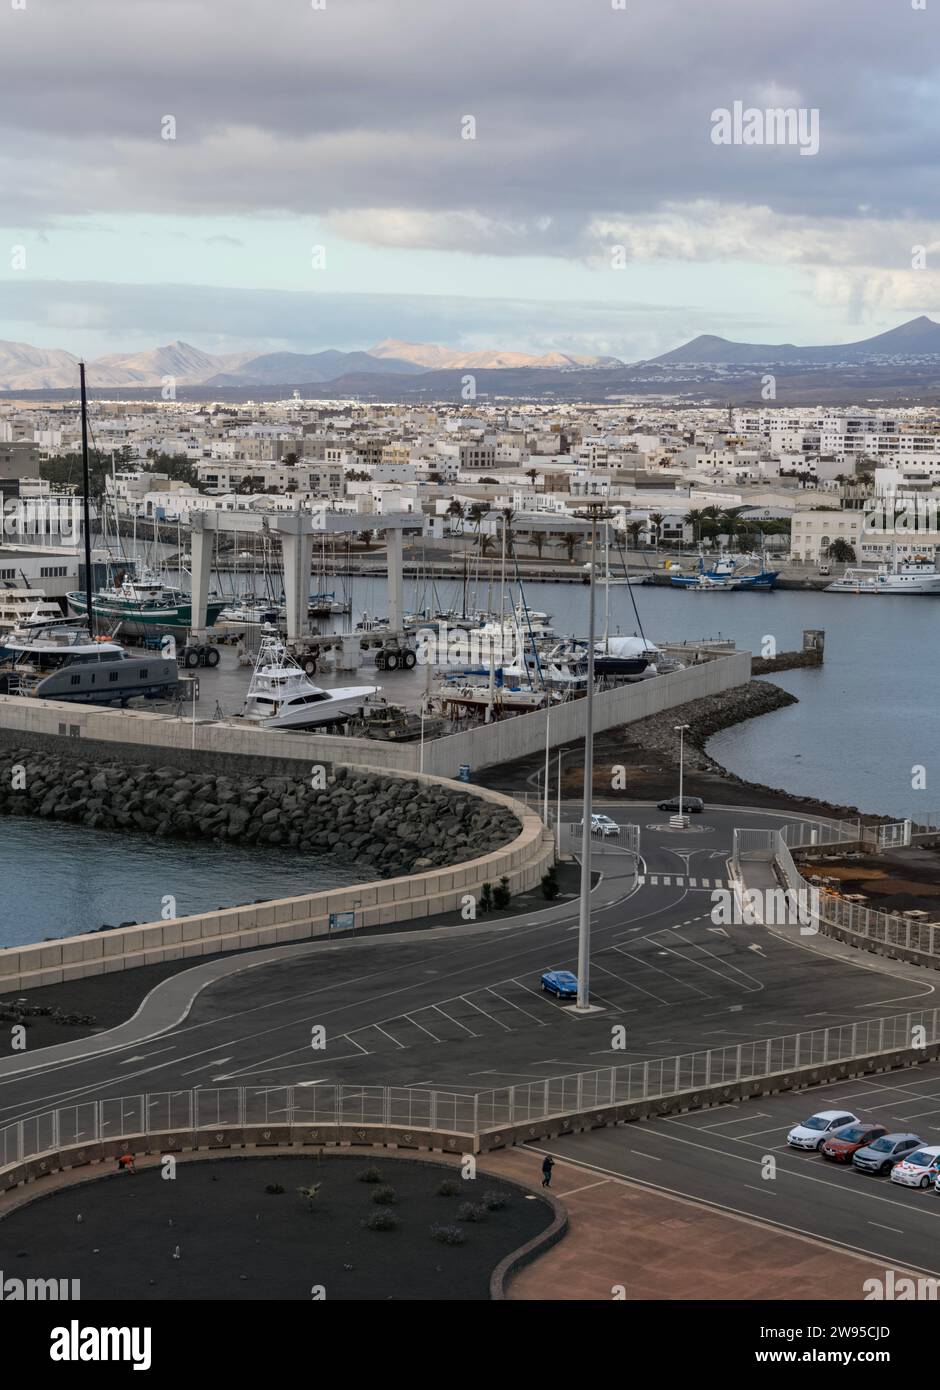 Views of the cruise port and harbour at Muelle de Cruseros, Arrecife, Lanzarote, Canary Islands, Spain Stock Photo